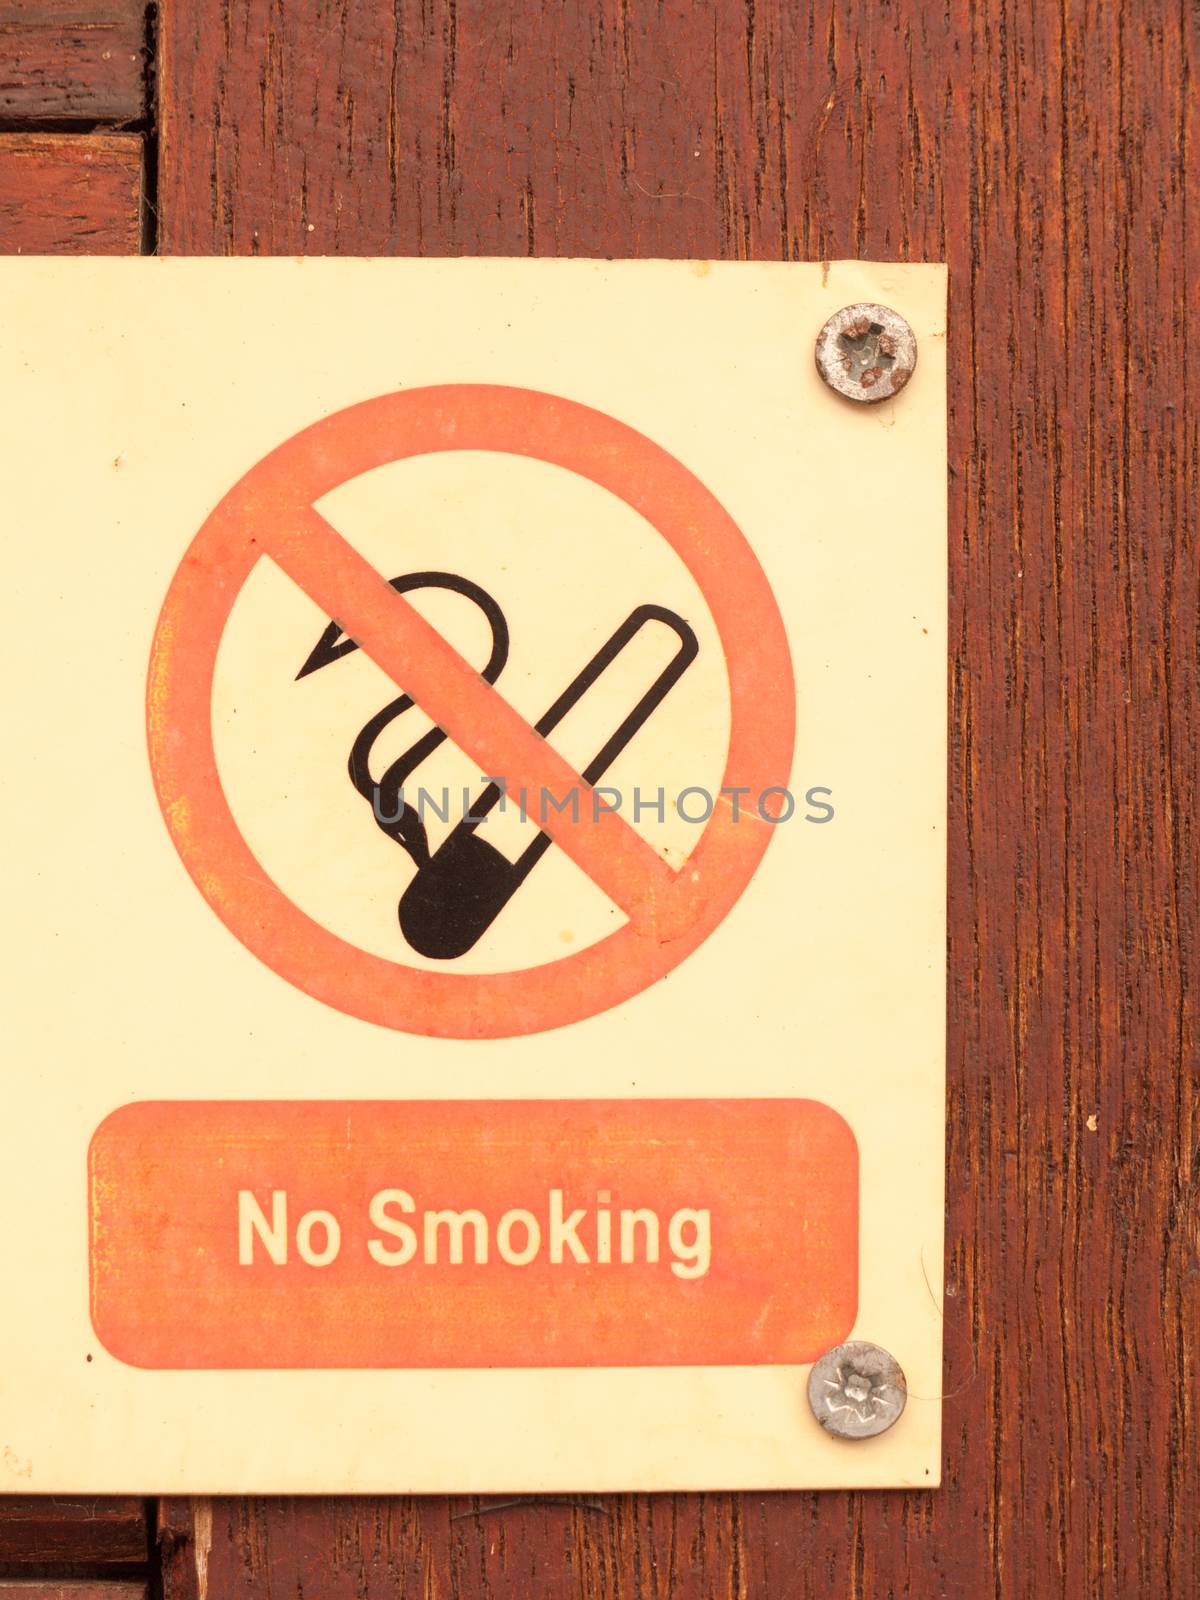 a nailed and screwed down sign red and black and white saying no smoking with a circle crossed of a cig cigarette no allowed safety health private restrictions law safety